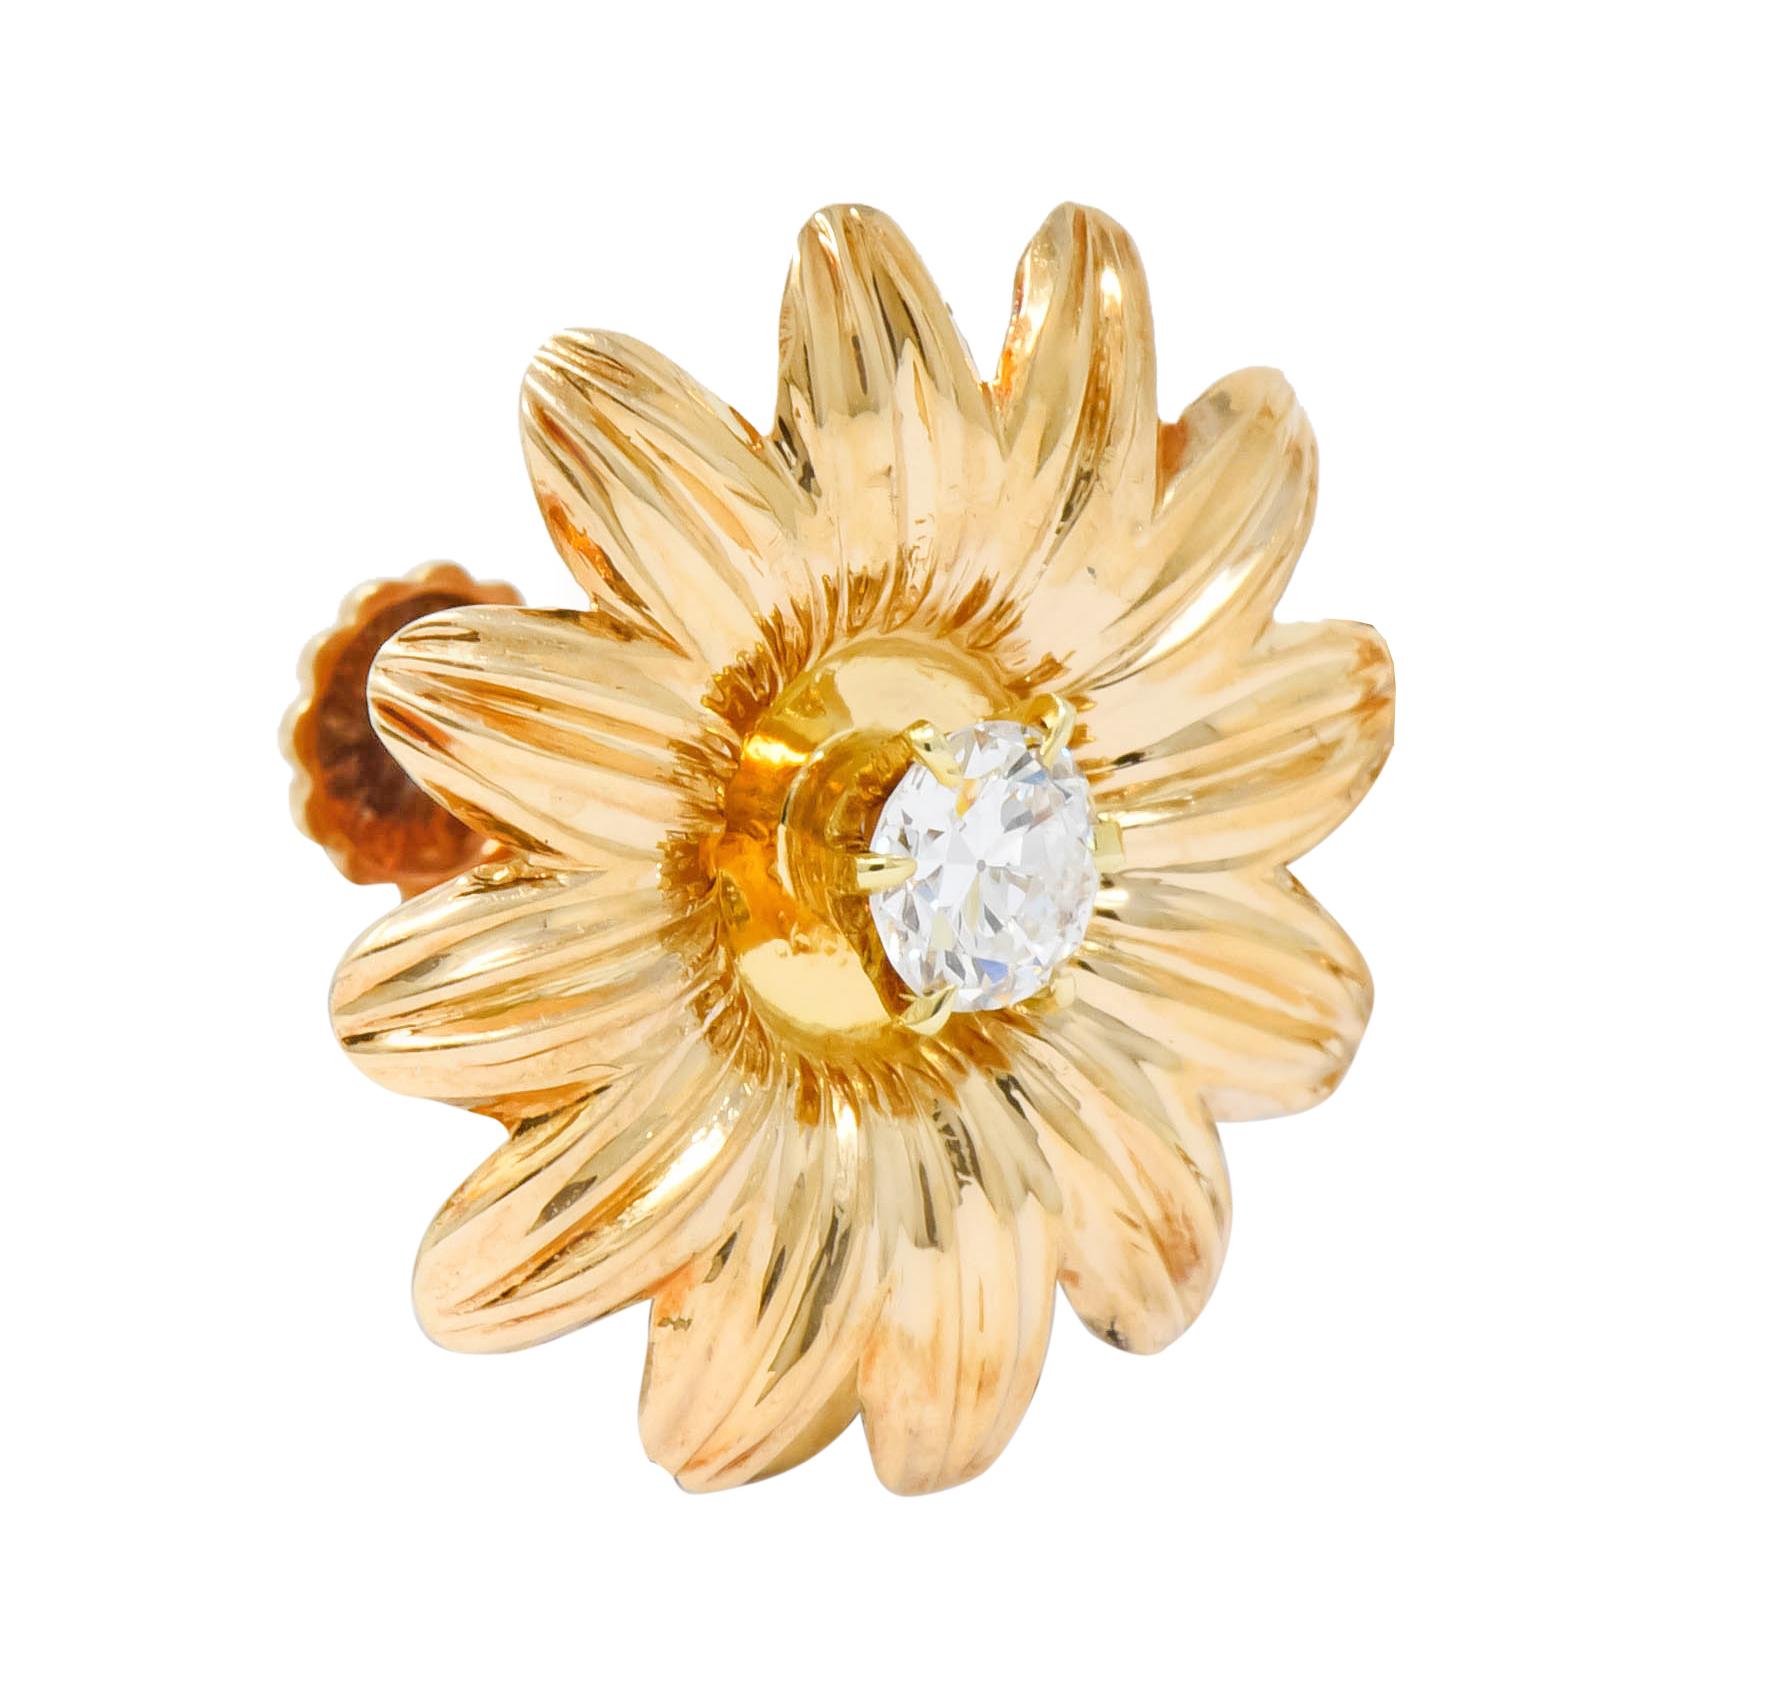 Each earring designed as a fully bloomed flower with realistically ridged petals and a high polished finish

Centering prong set transitional cut diamonds weighing approximately 0.52 carat total, G/H color and VS clarity

Completed by screw